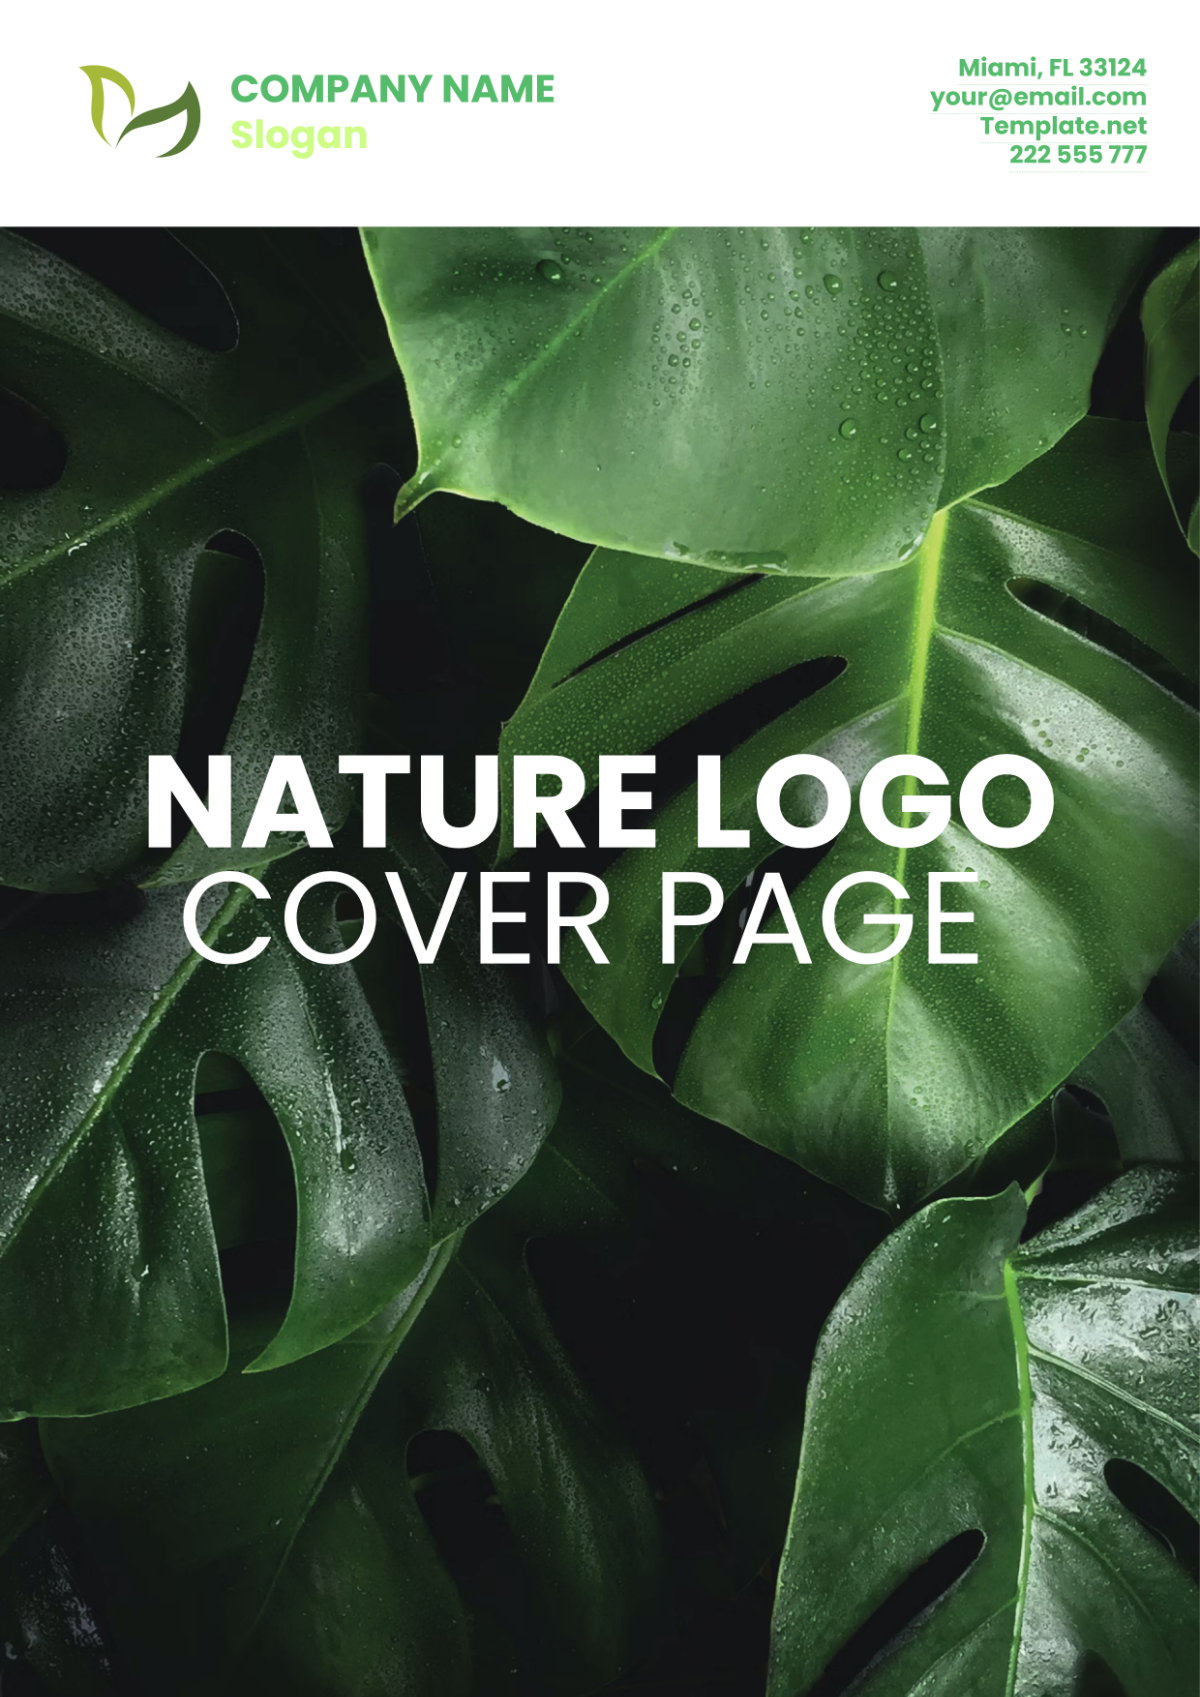 Free Nature Logo Cover Page Template